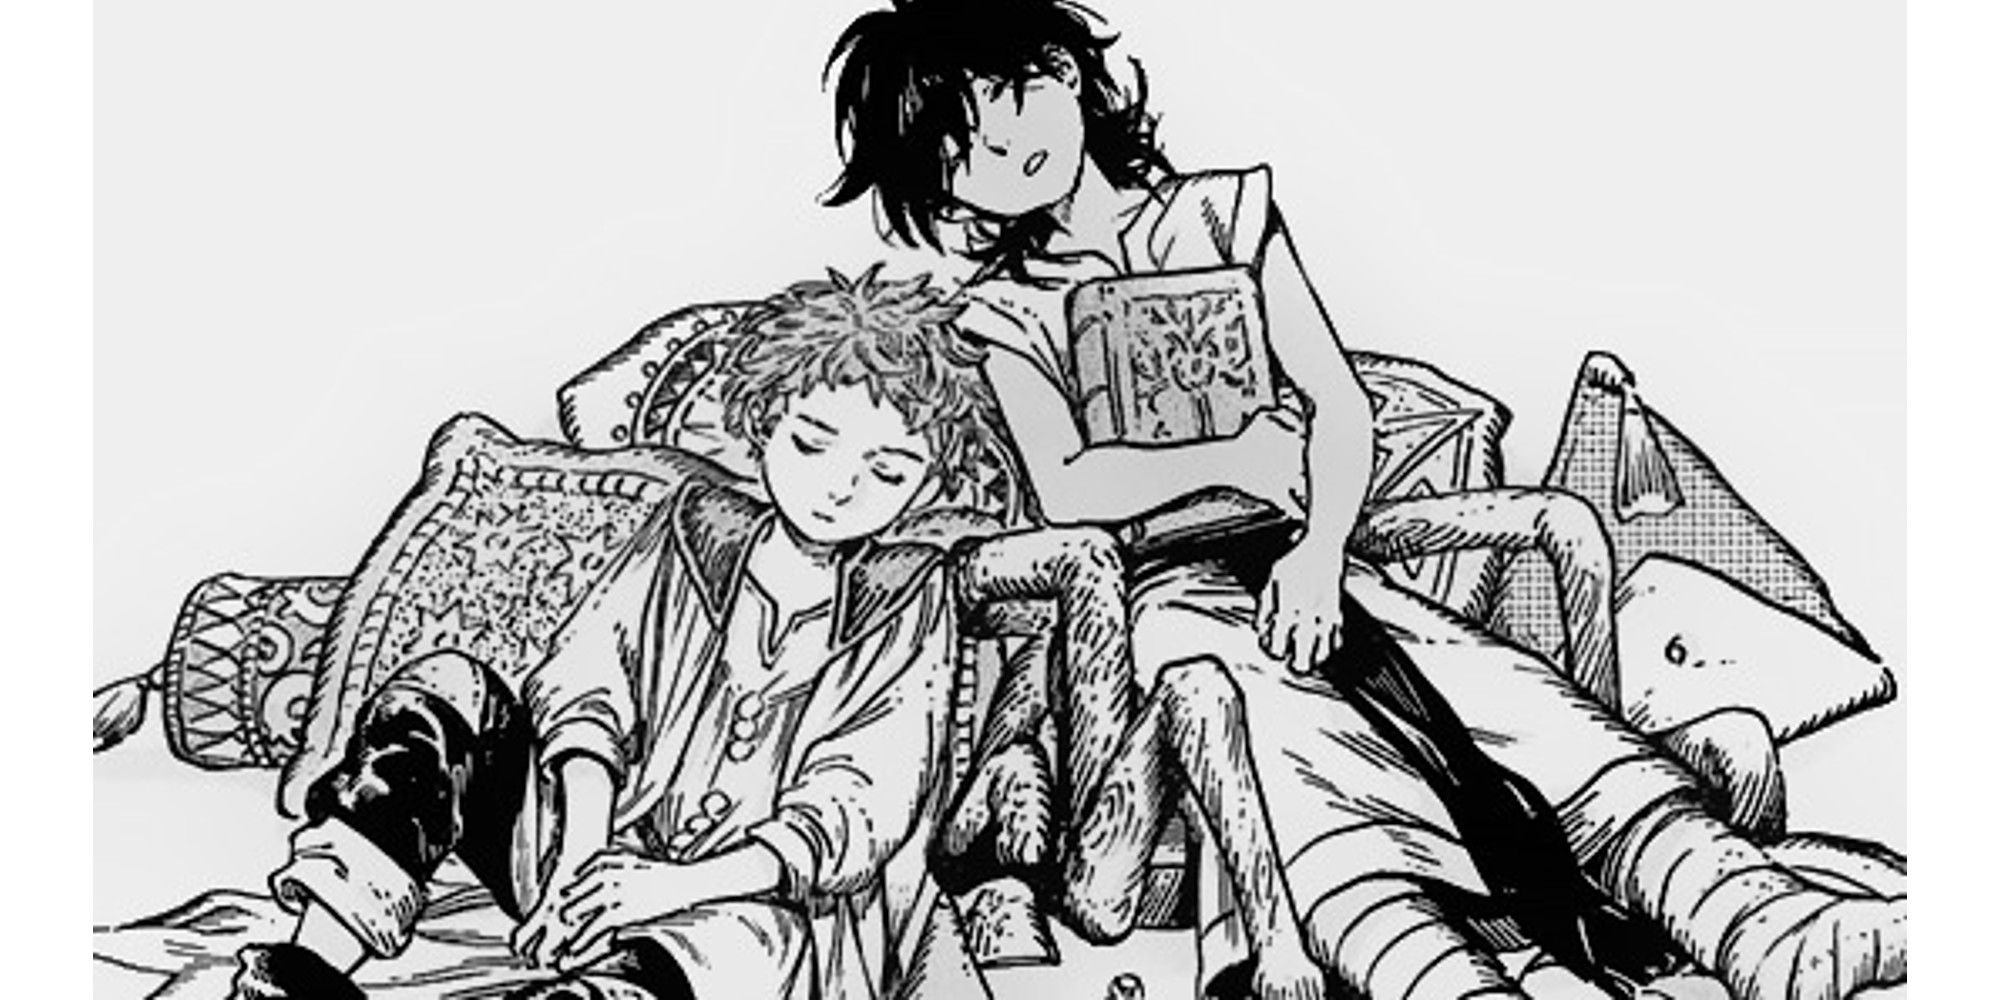 Custas (right) and Tartah (Left) from the manga series Witch Hat Atelier.